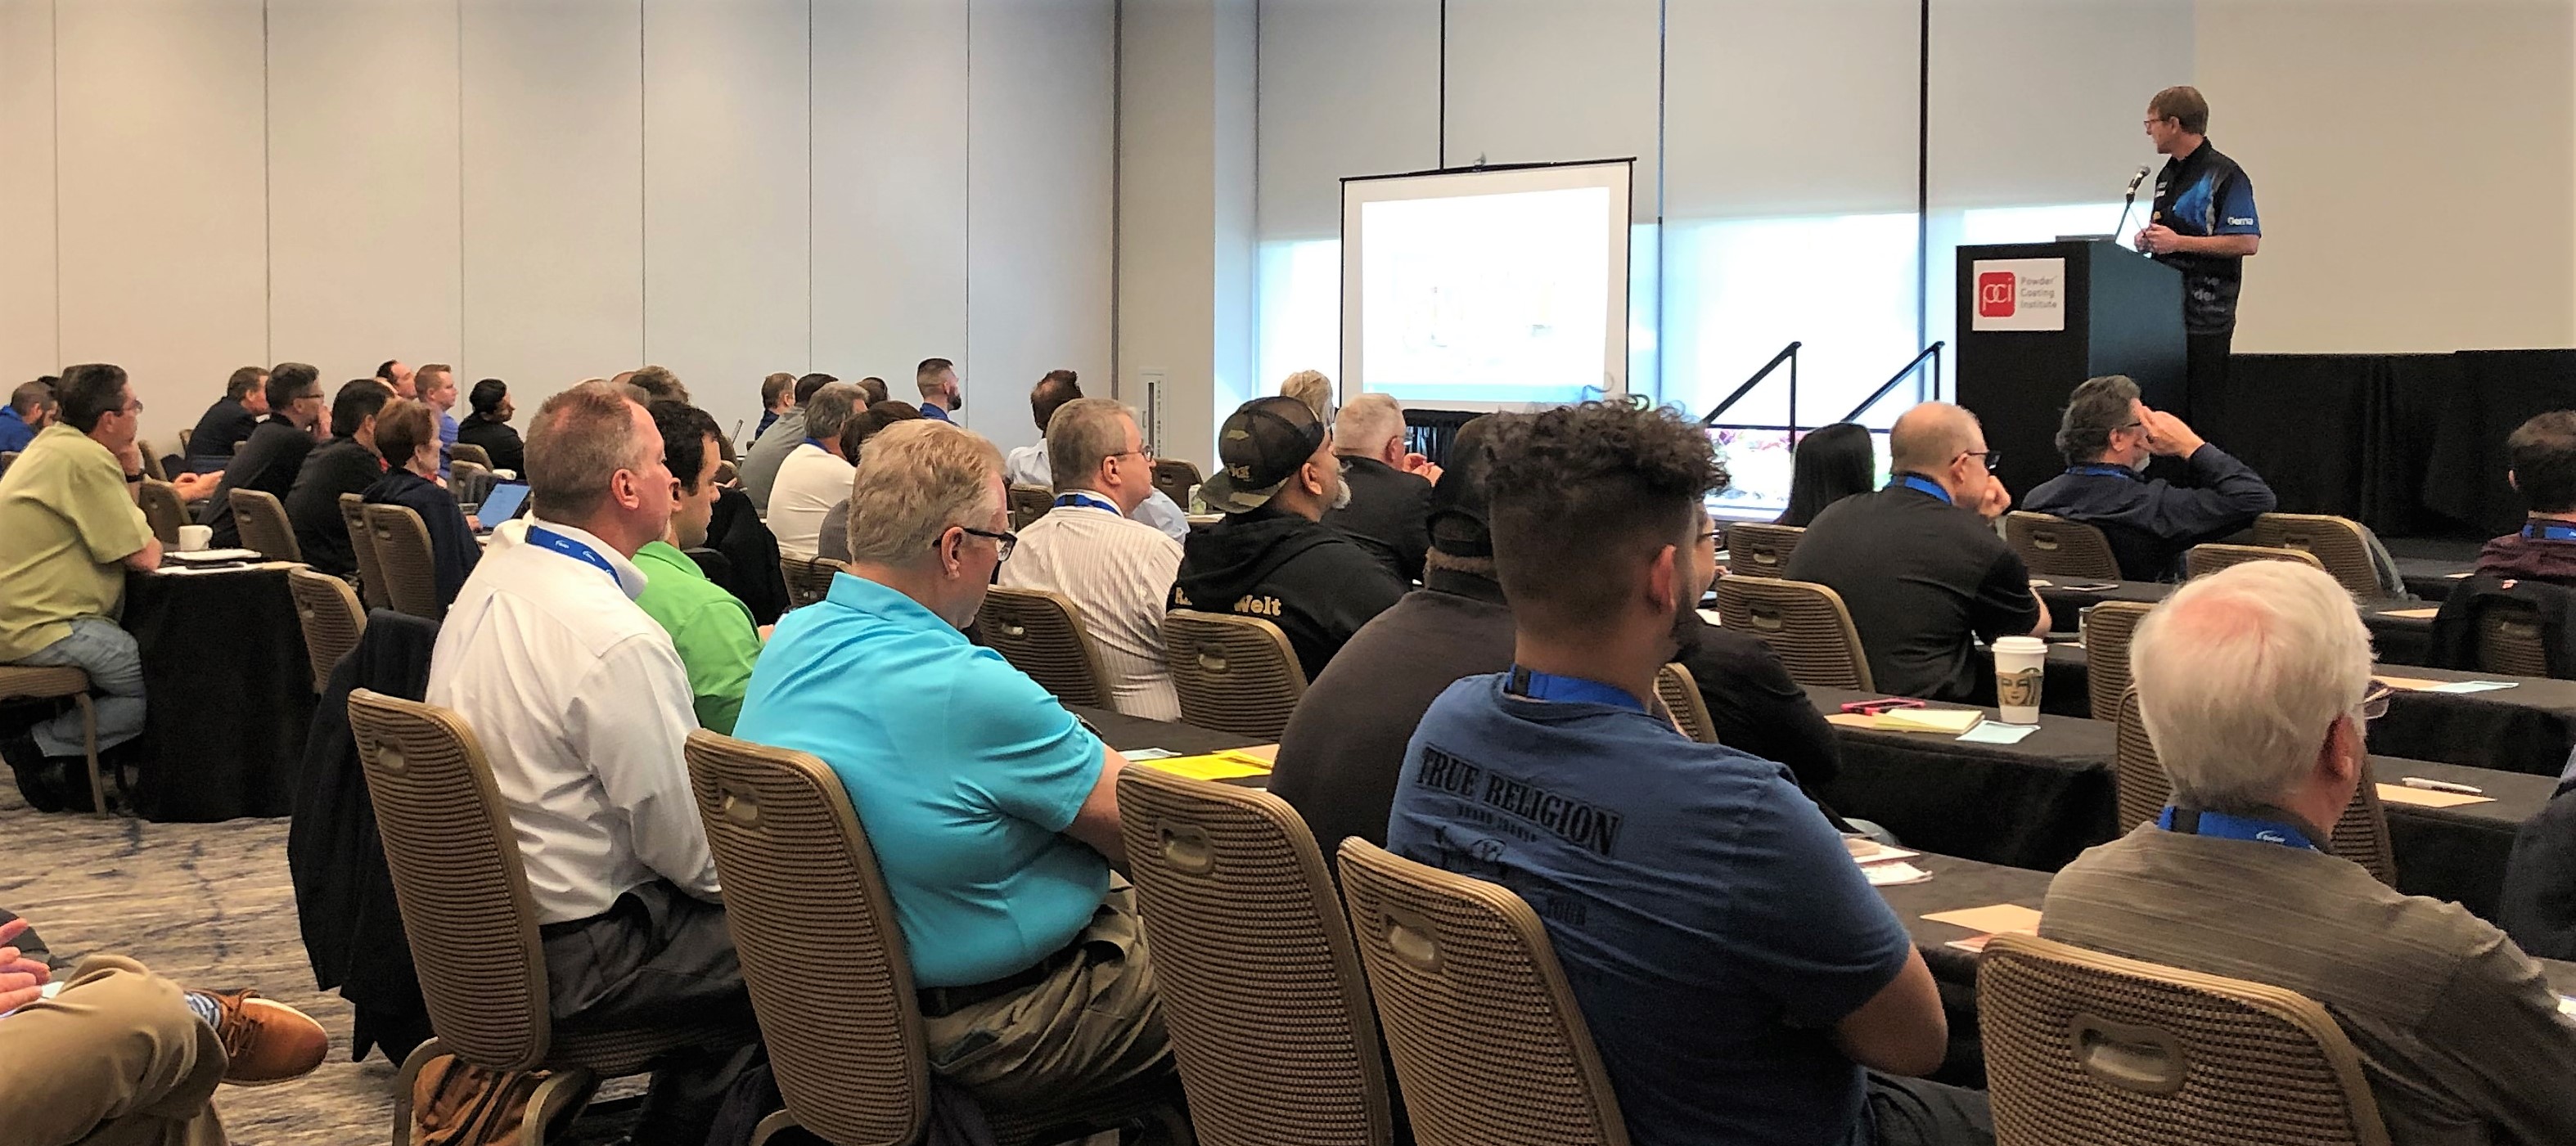 PCI’s technical conference offers a variety of powder coating sessions presented by industry experts.